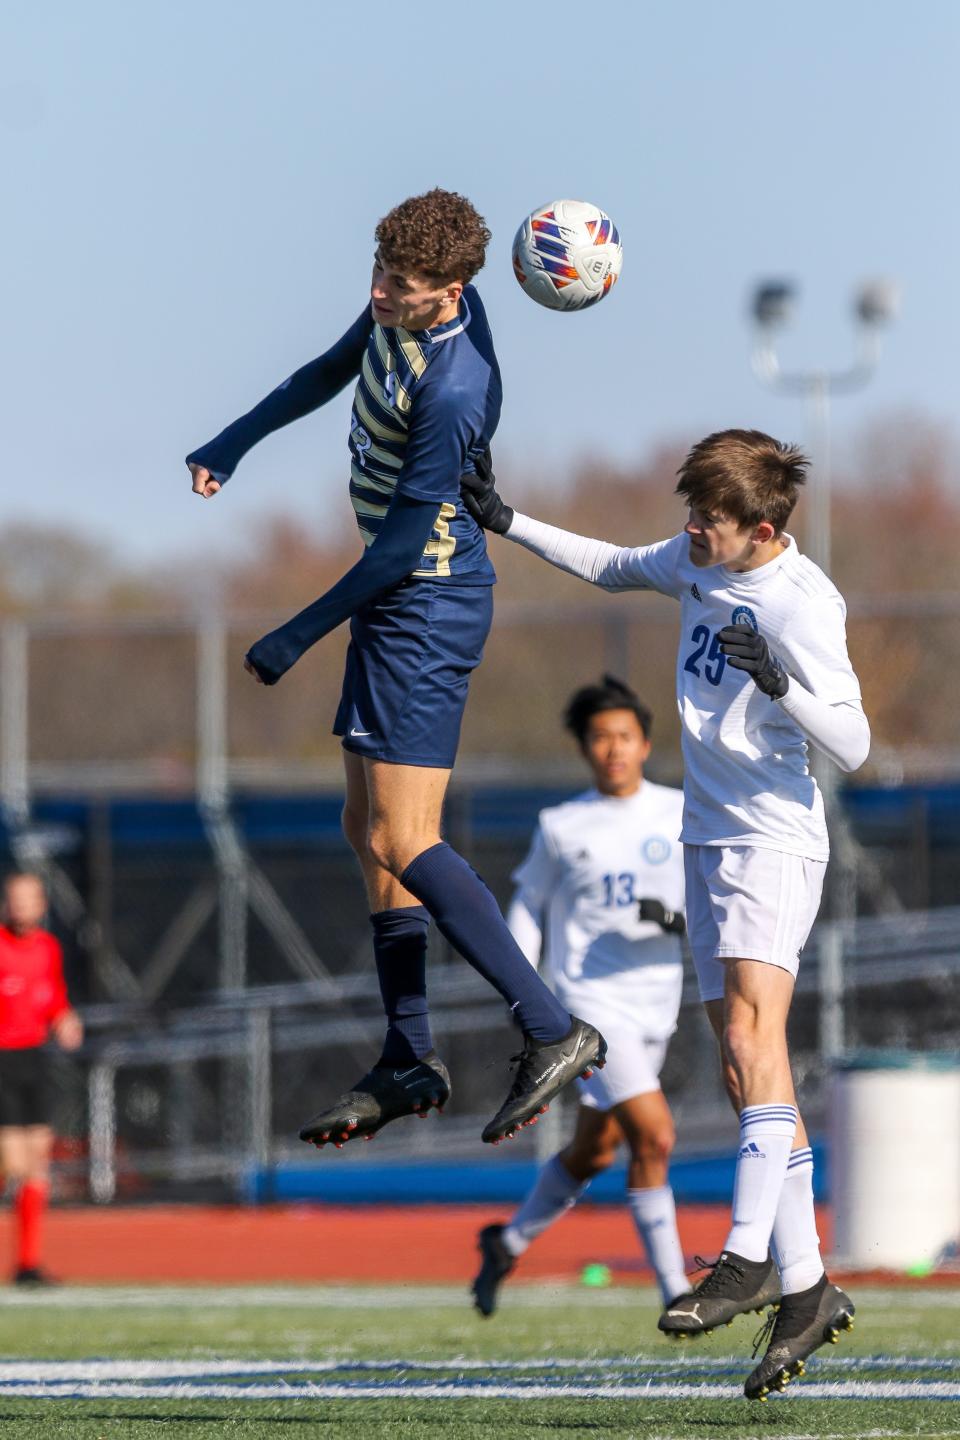 Salesianum’s Jake Ross heads the ball as Charter of Wilmington’s Callum Jones defends during the Sals’ 4-1 win in the DIAA Division I Boys Soccer championship game Saturday at Dover High. Ross has been voted Delaware's Player of the Year by the state's coaches.